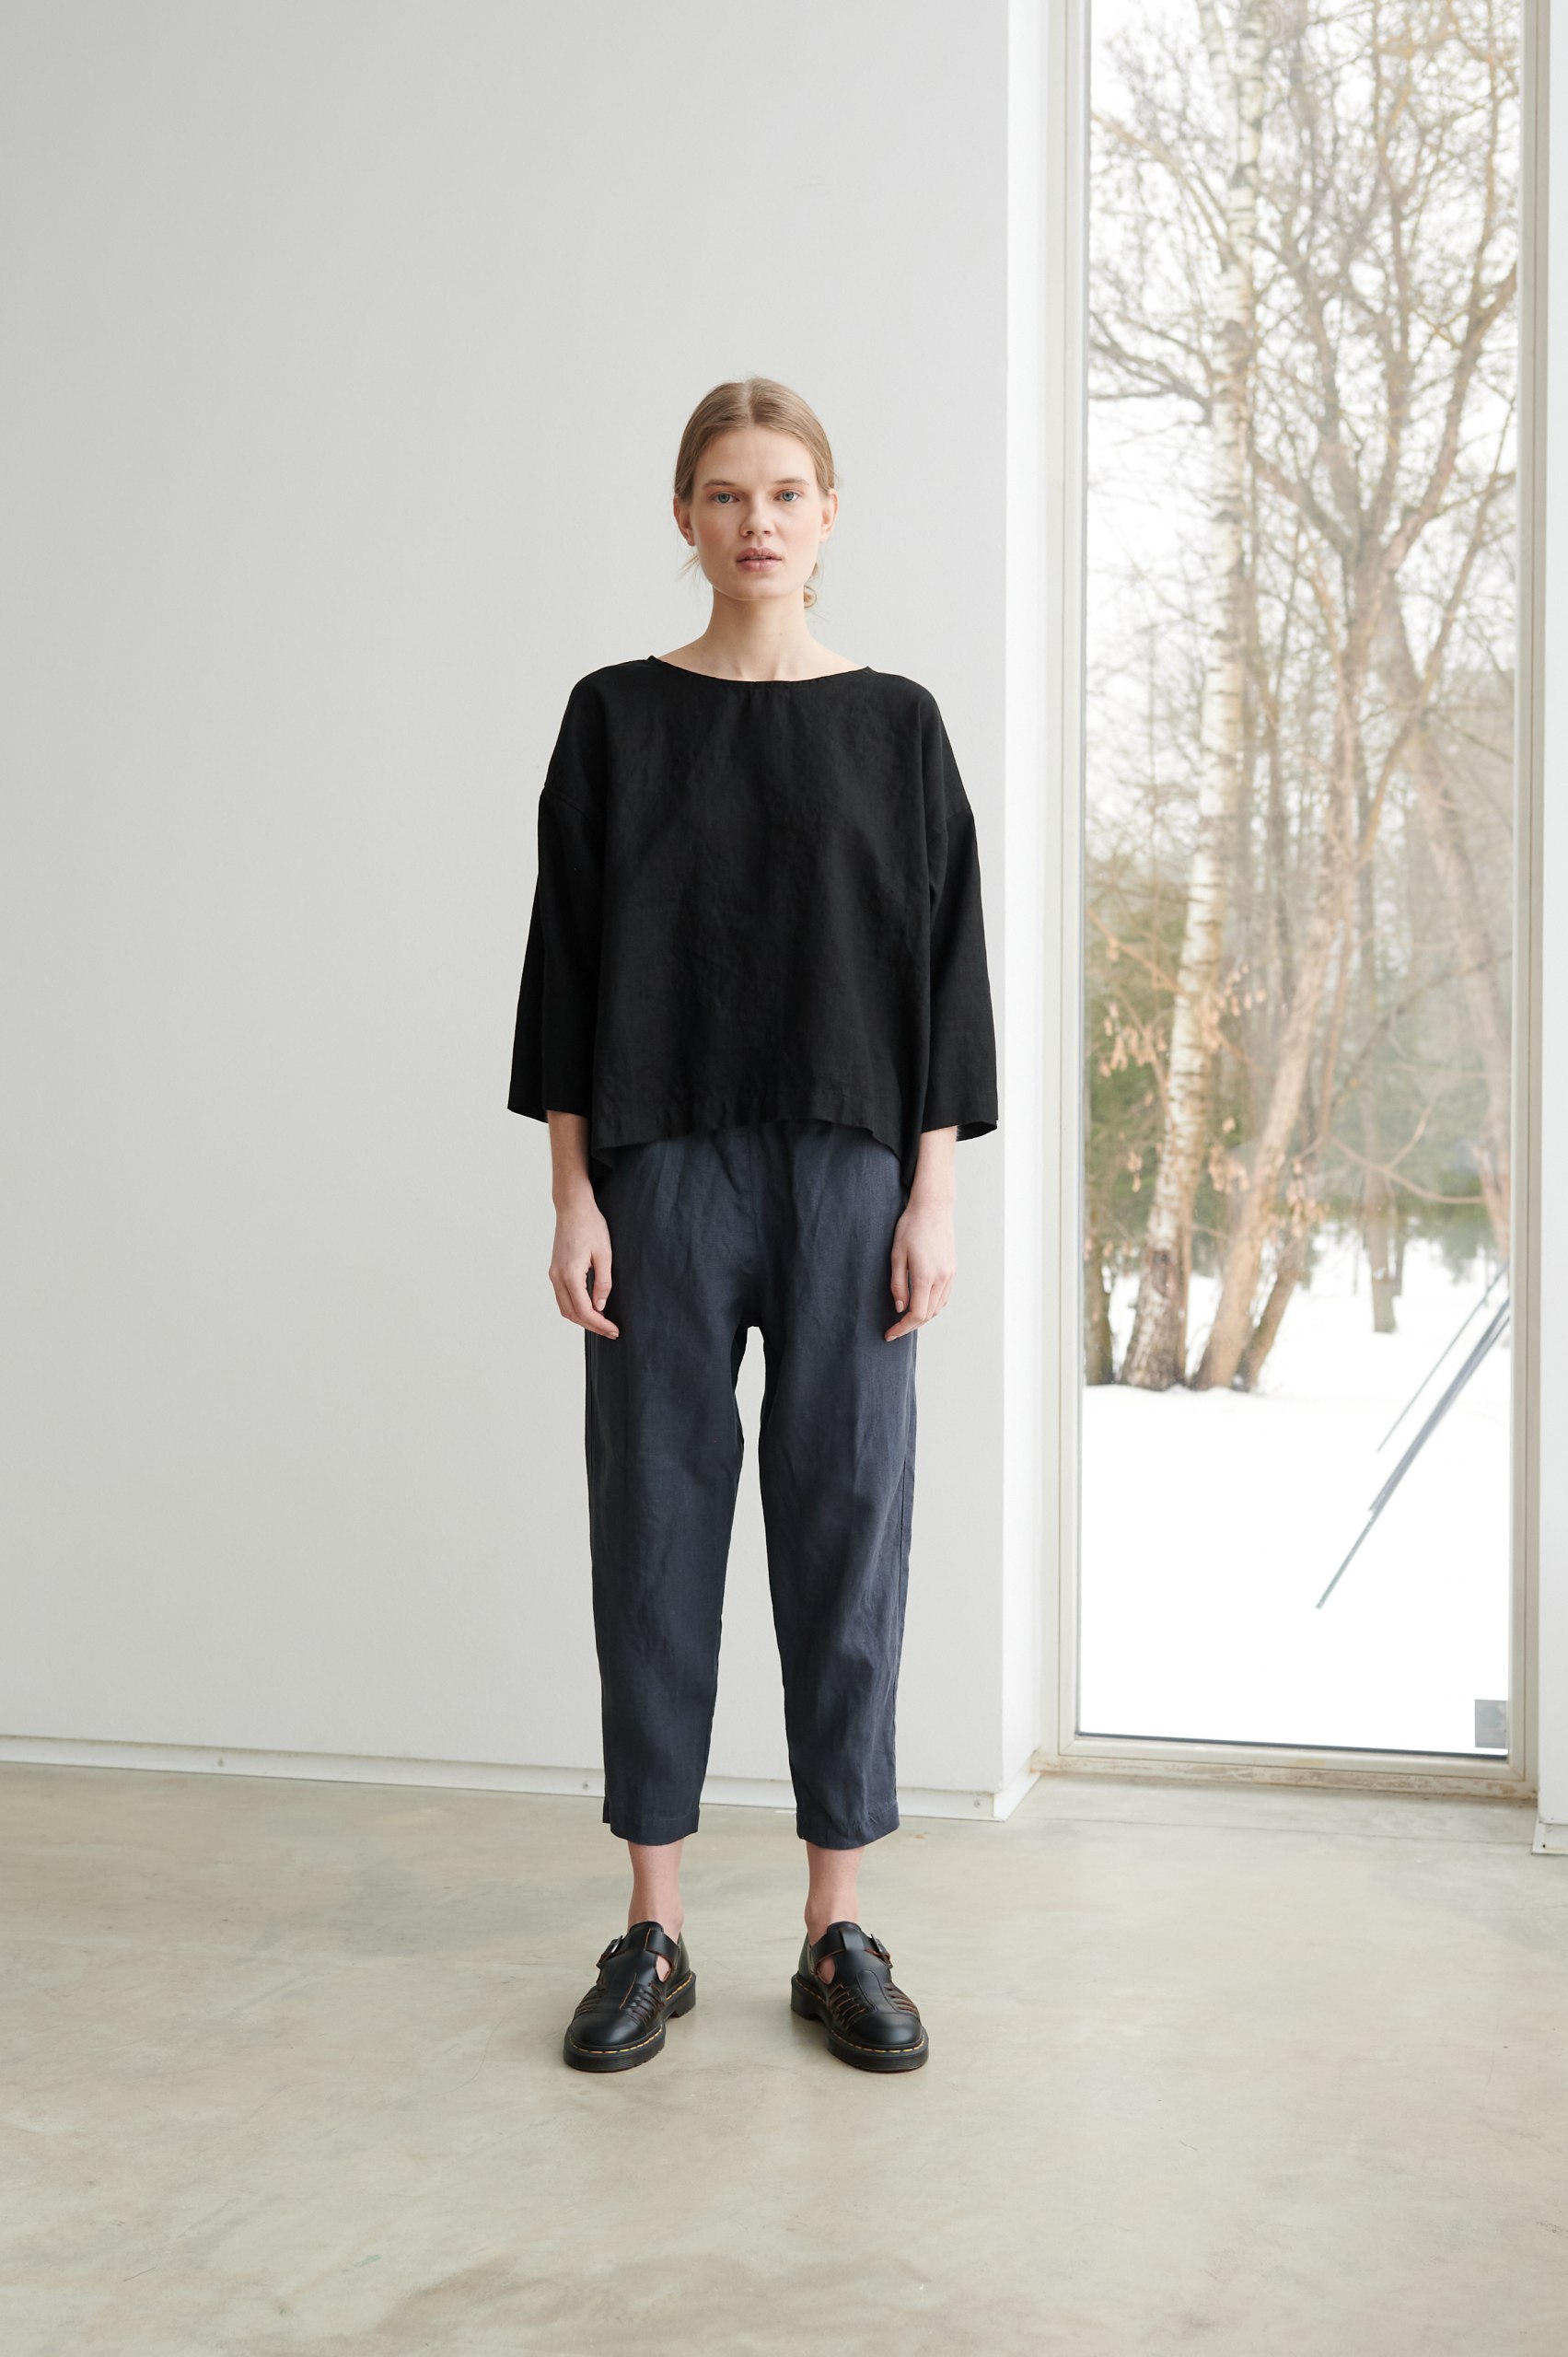 Oversized black linen tunic and trousers